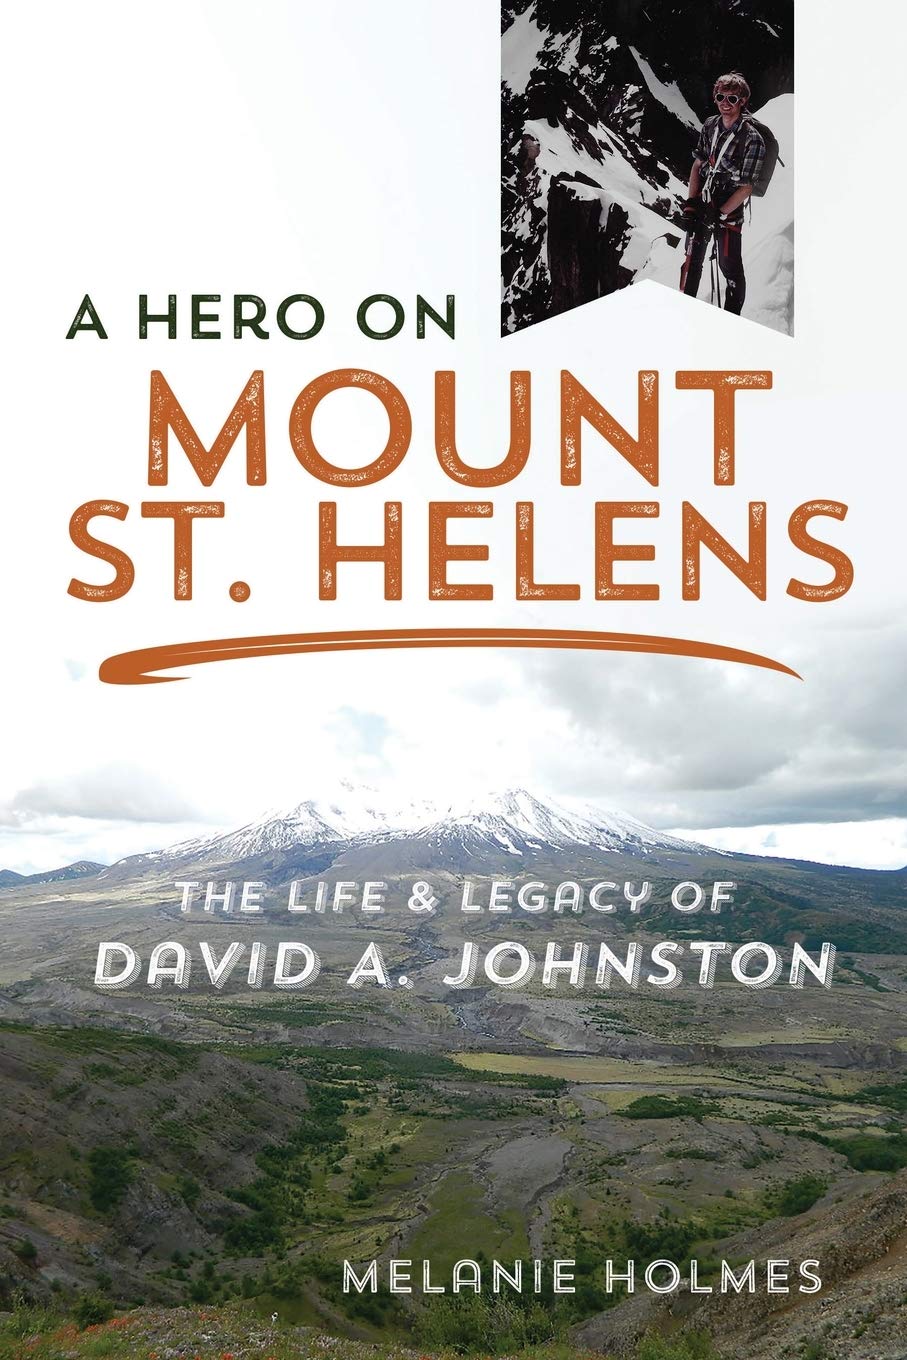 Cover of A Hero on Mount St. Helens by Melanie Holmes